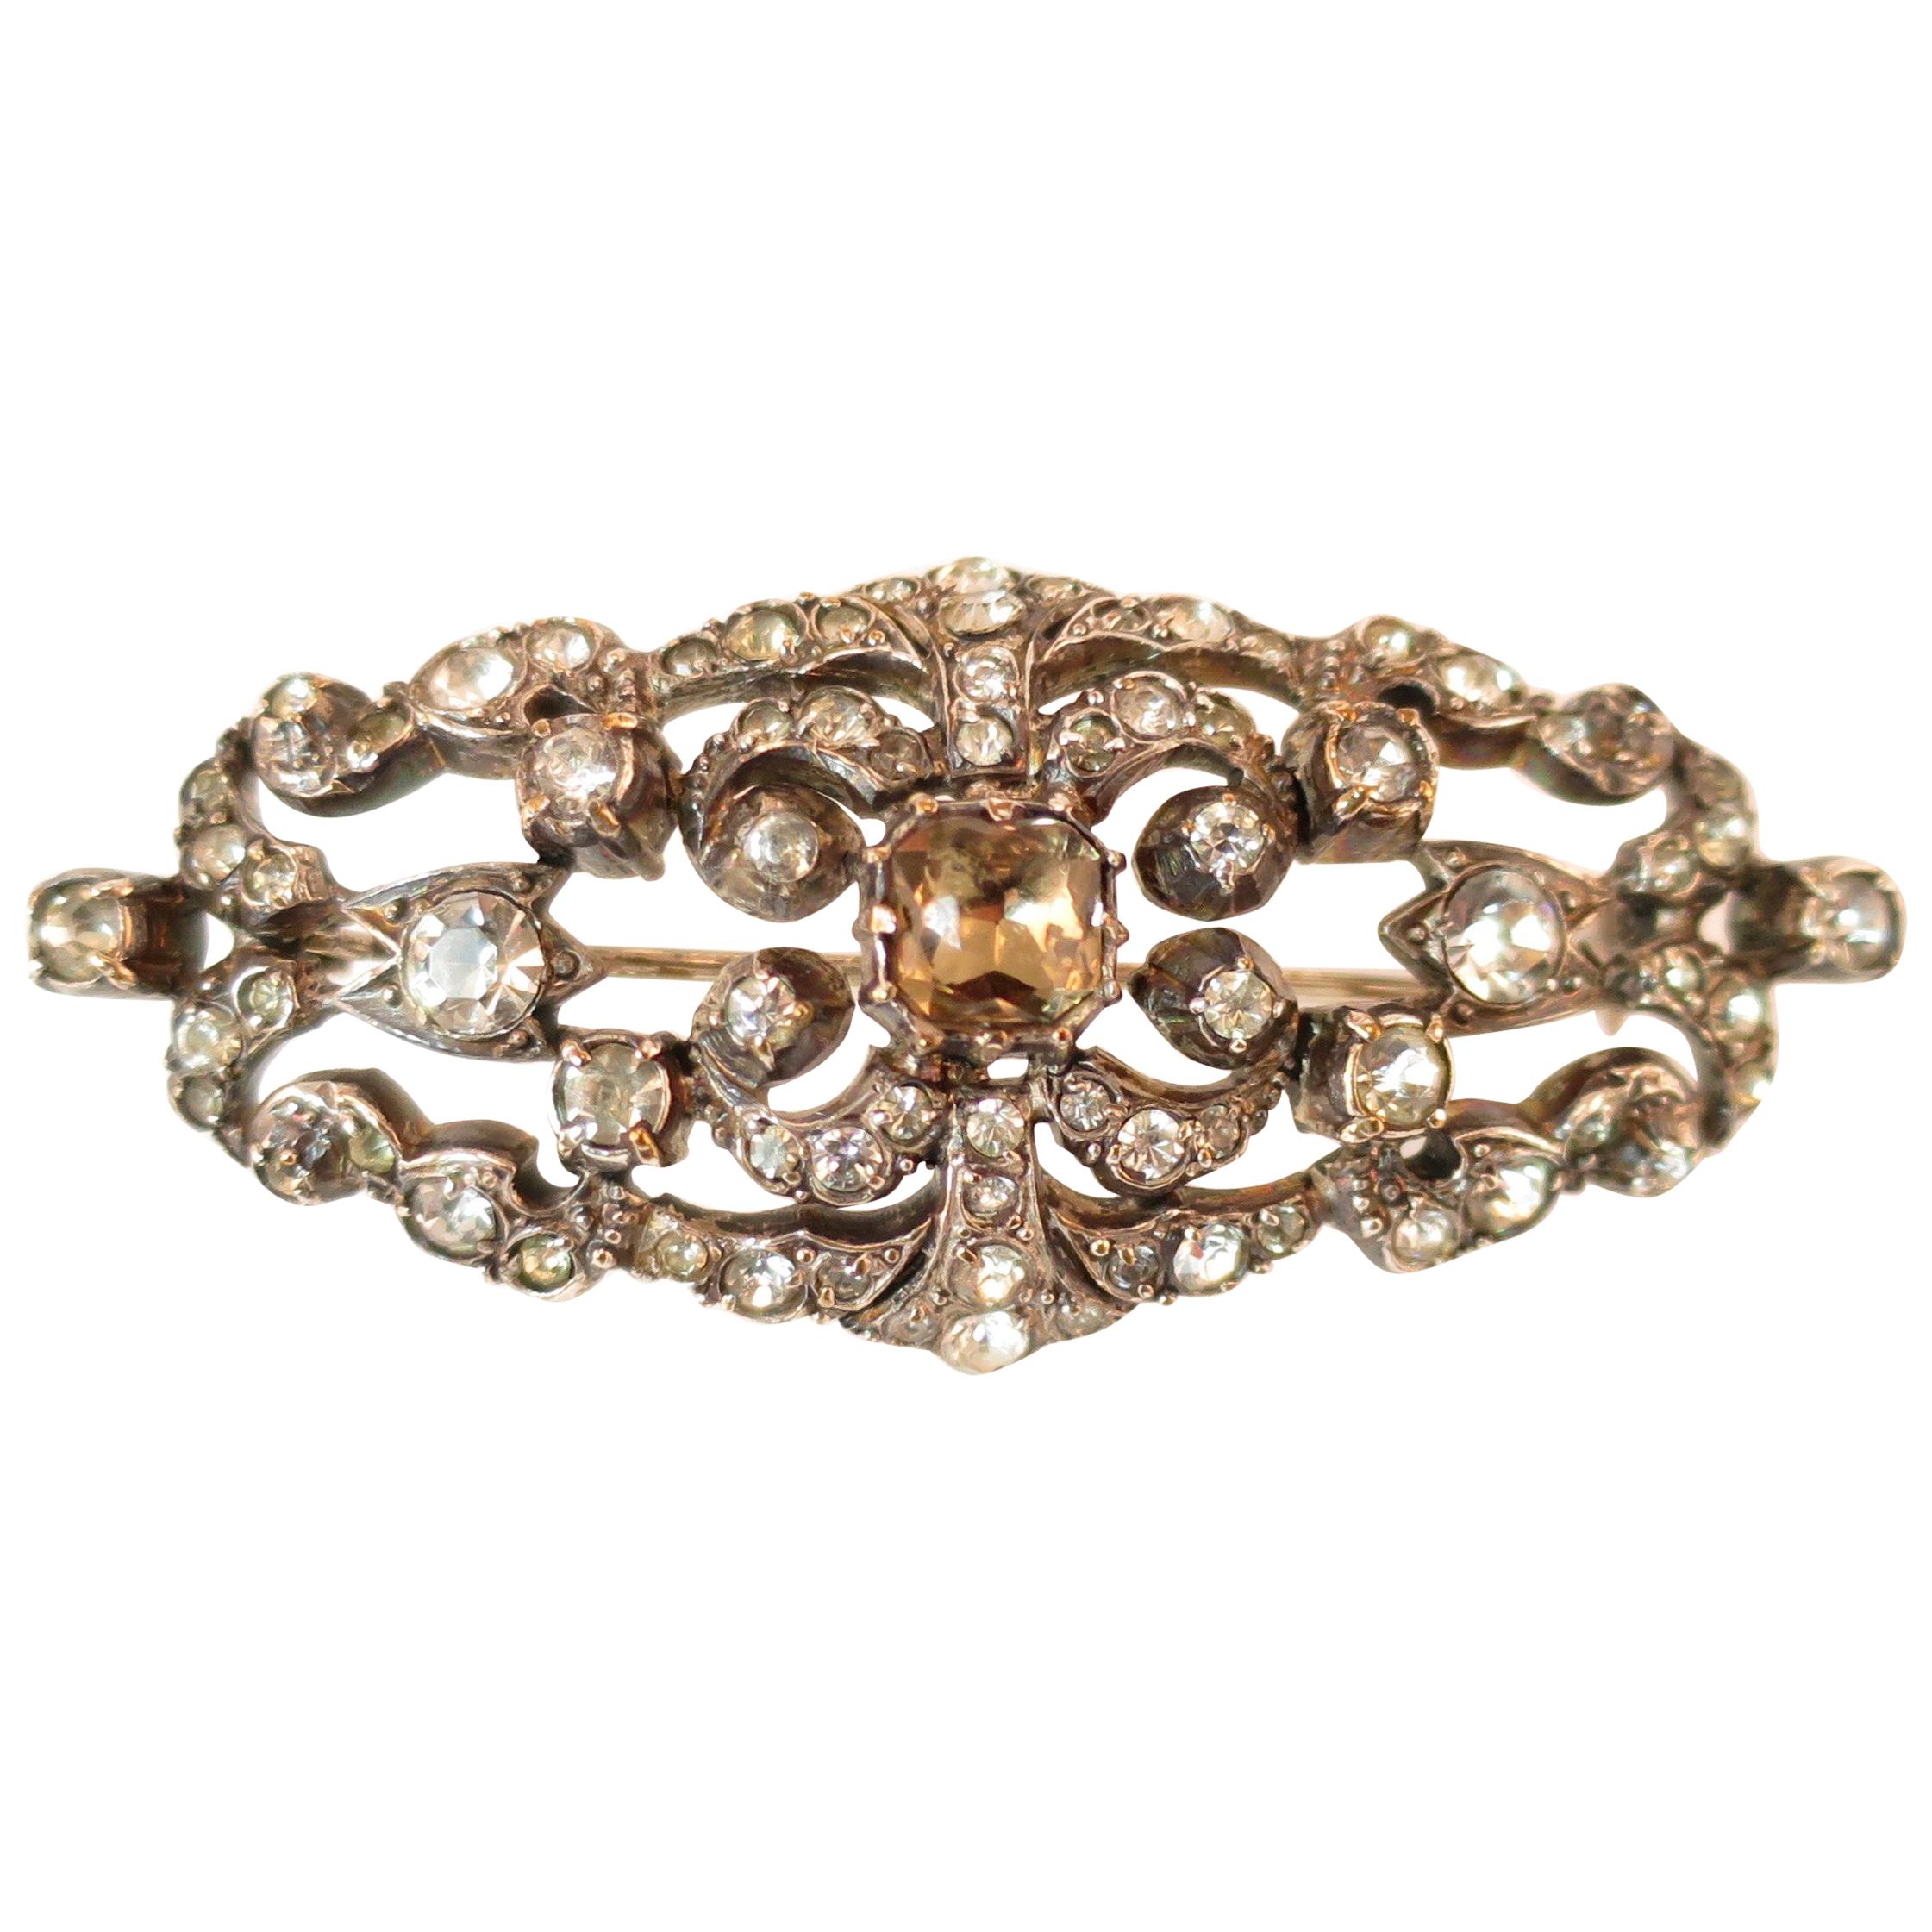 Edwardian Hand-Wrought Sterling & French Paste Brooch Circa 1905 im Angebot